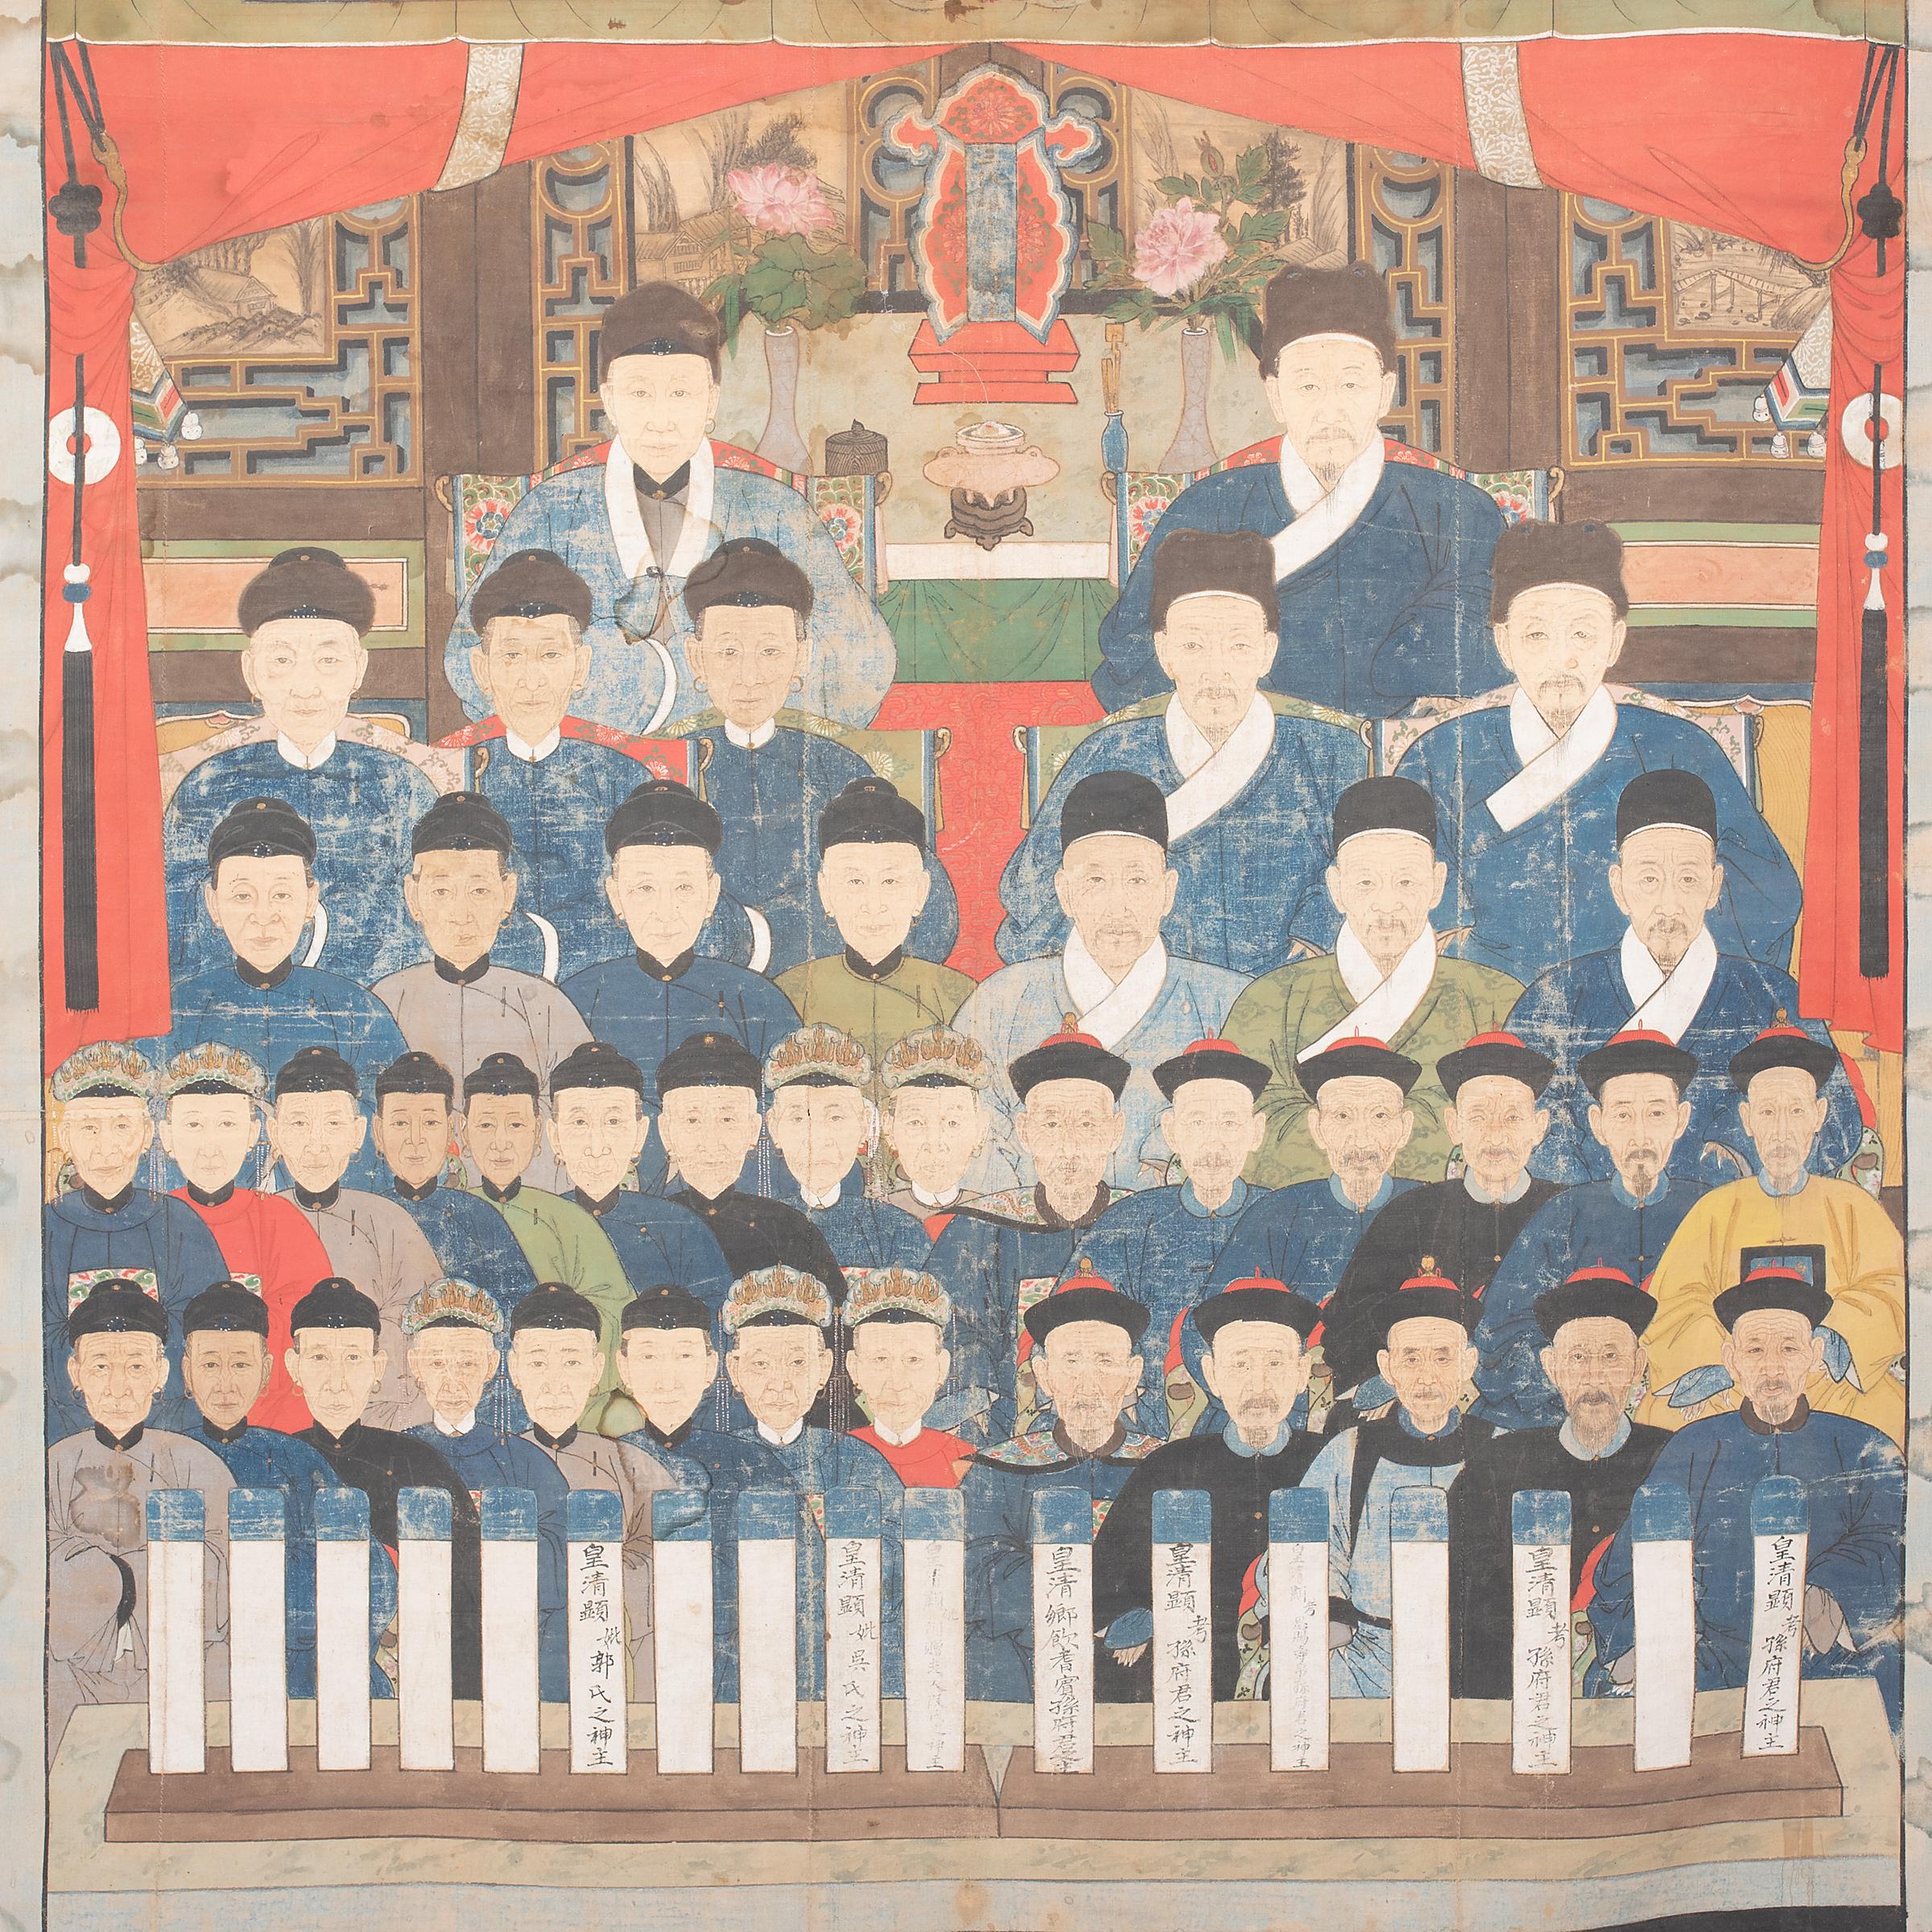 This intricately detailed composition is a late-Qing dynasty ancestor portrait depicting several generations of a family's ancestry. The painting would have been displayed in the home as the object of familial ancestor worship. When properly cared